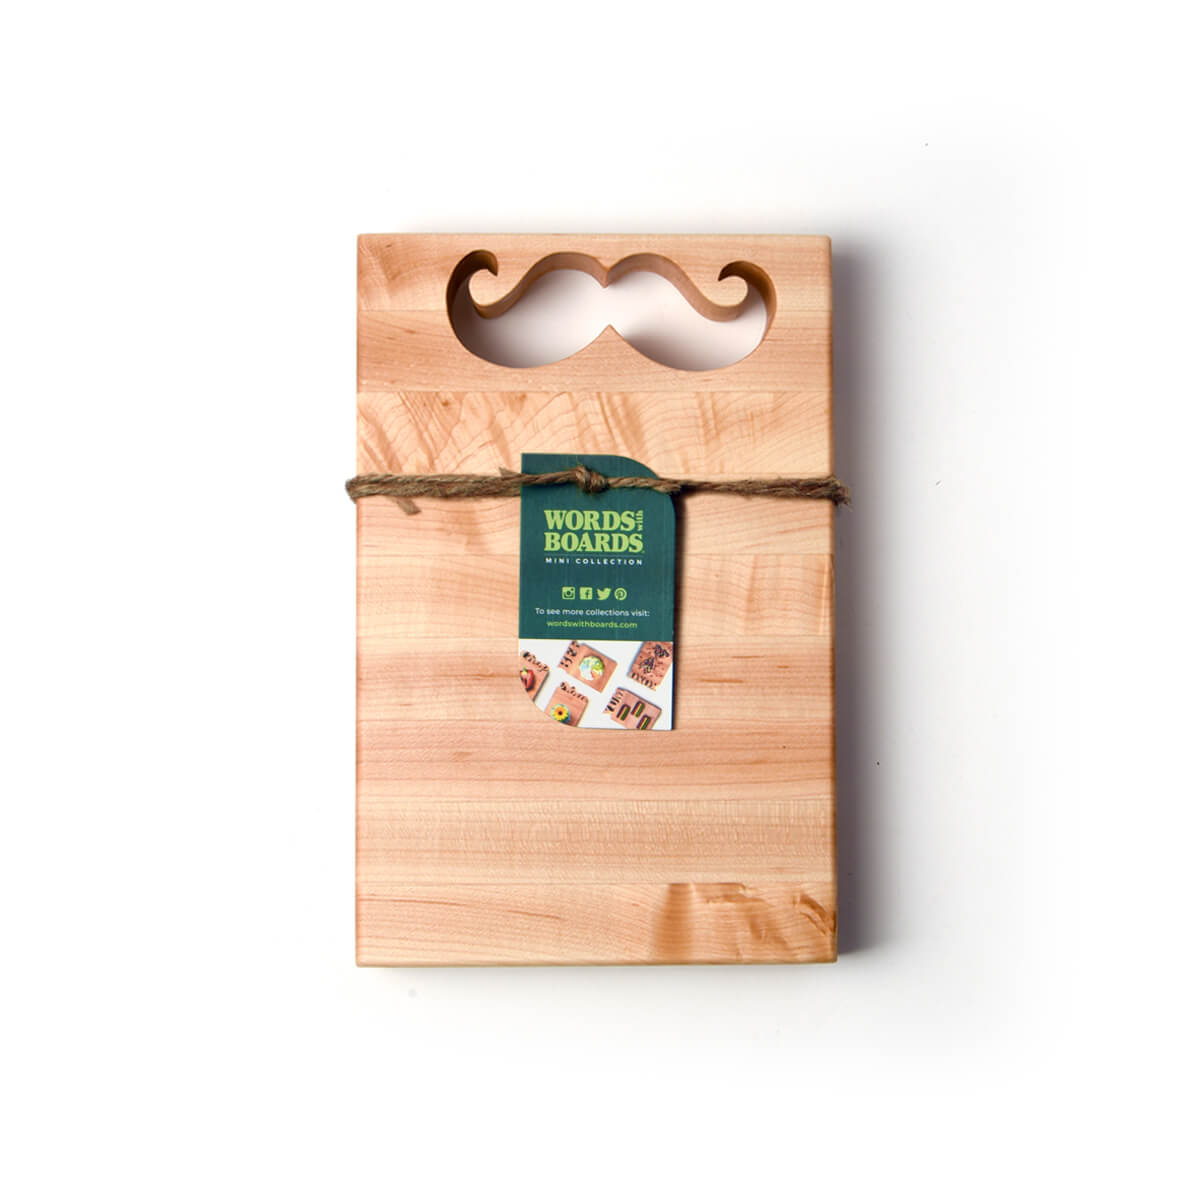 Mustache gift - wood cutting board with mustache shape cut out.jpg